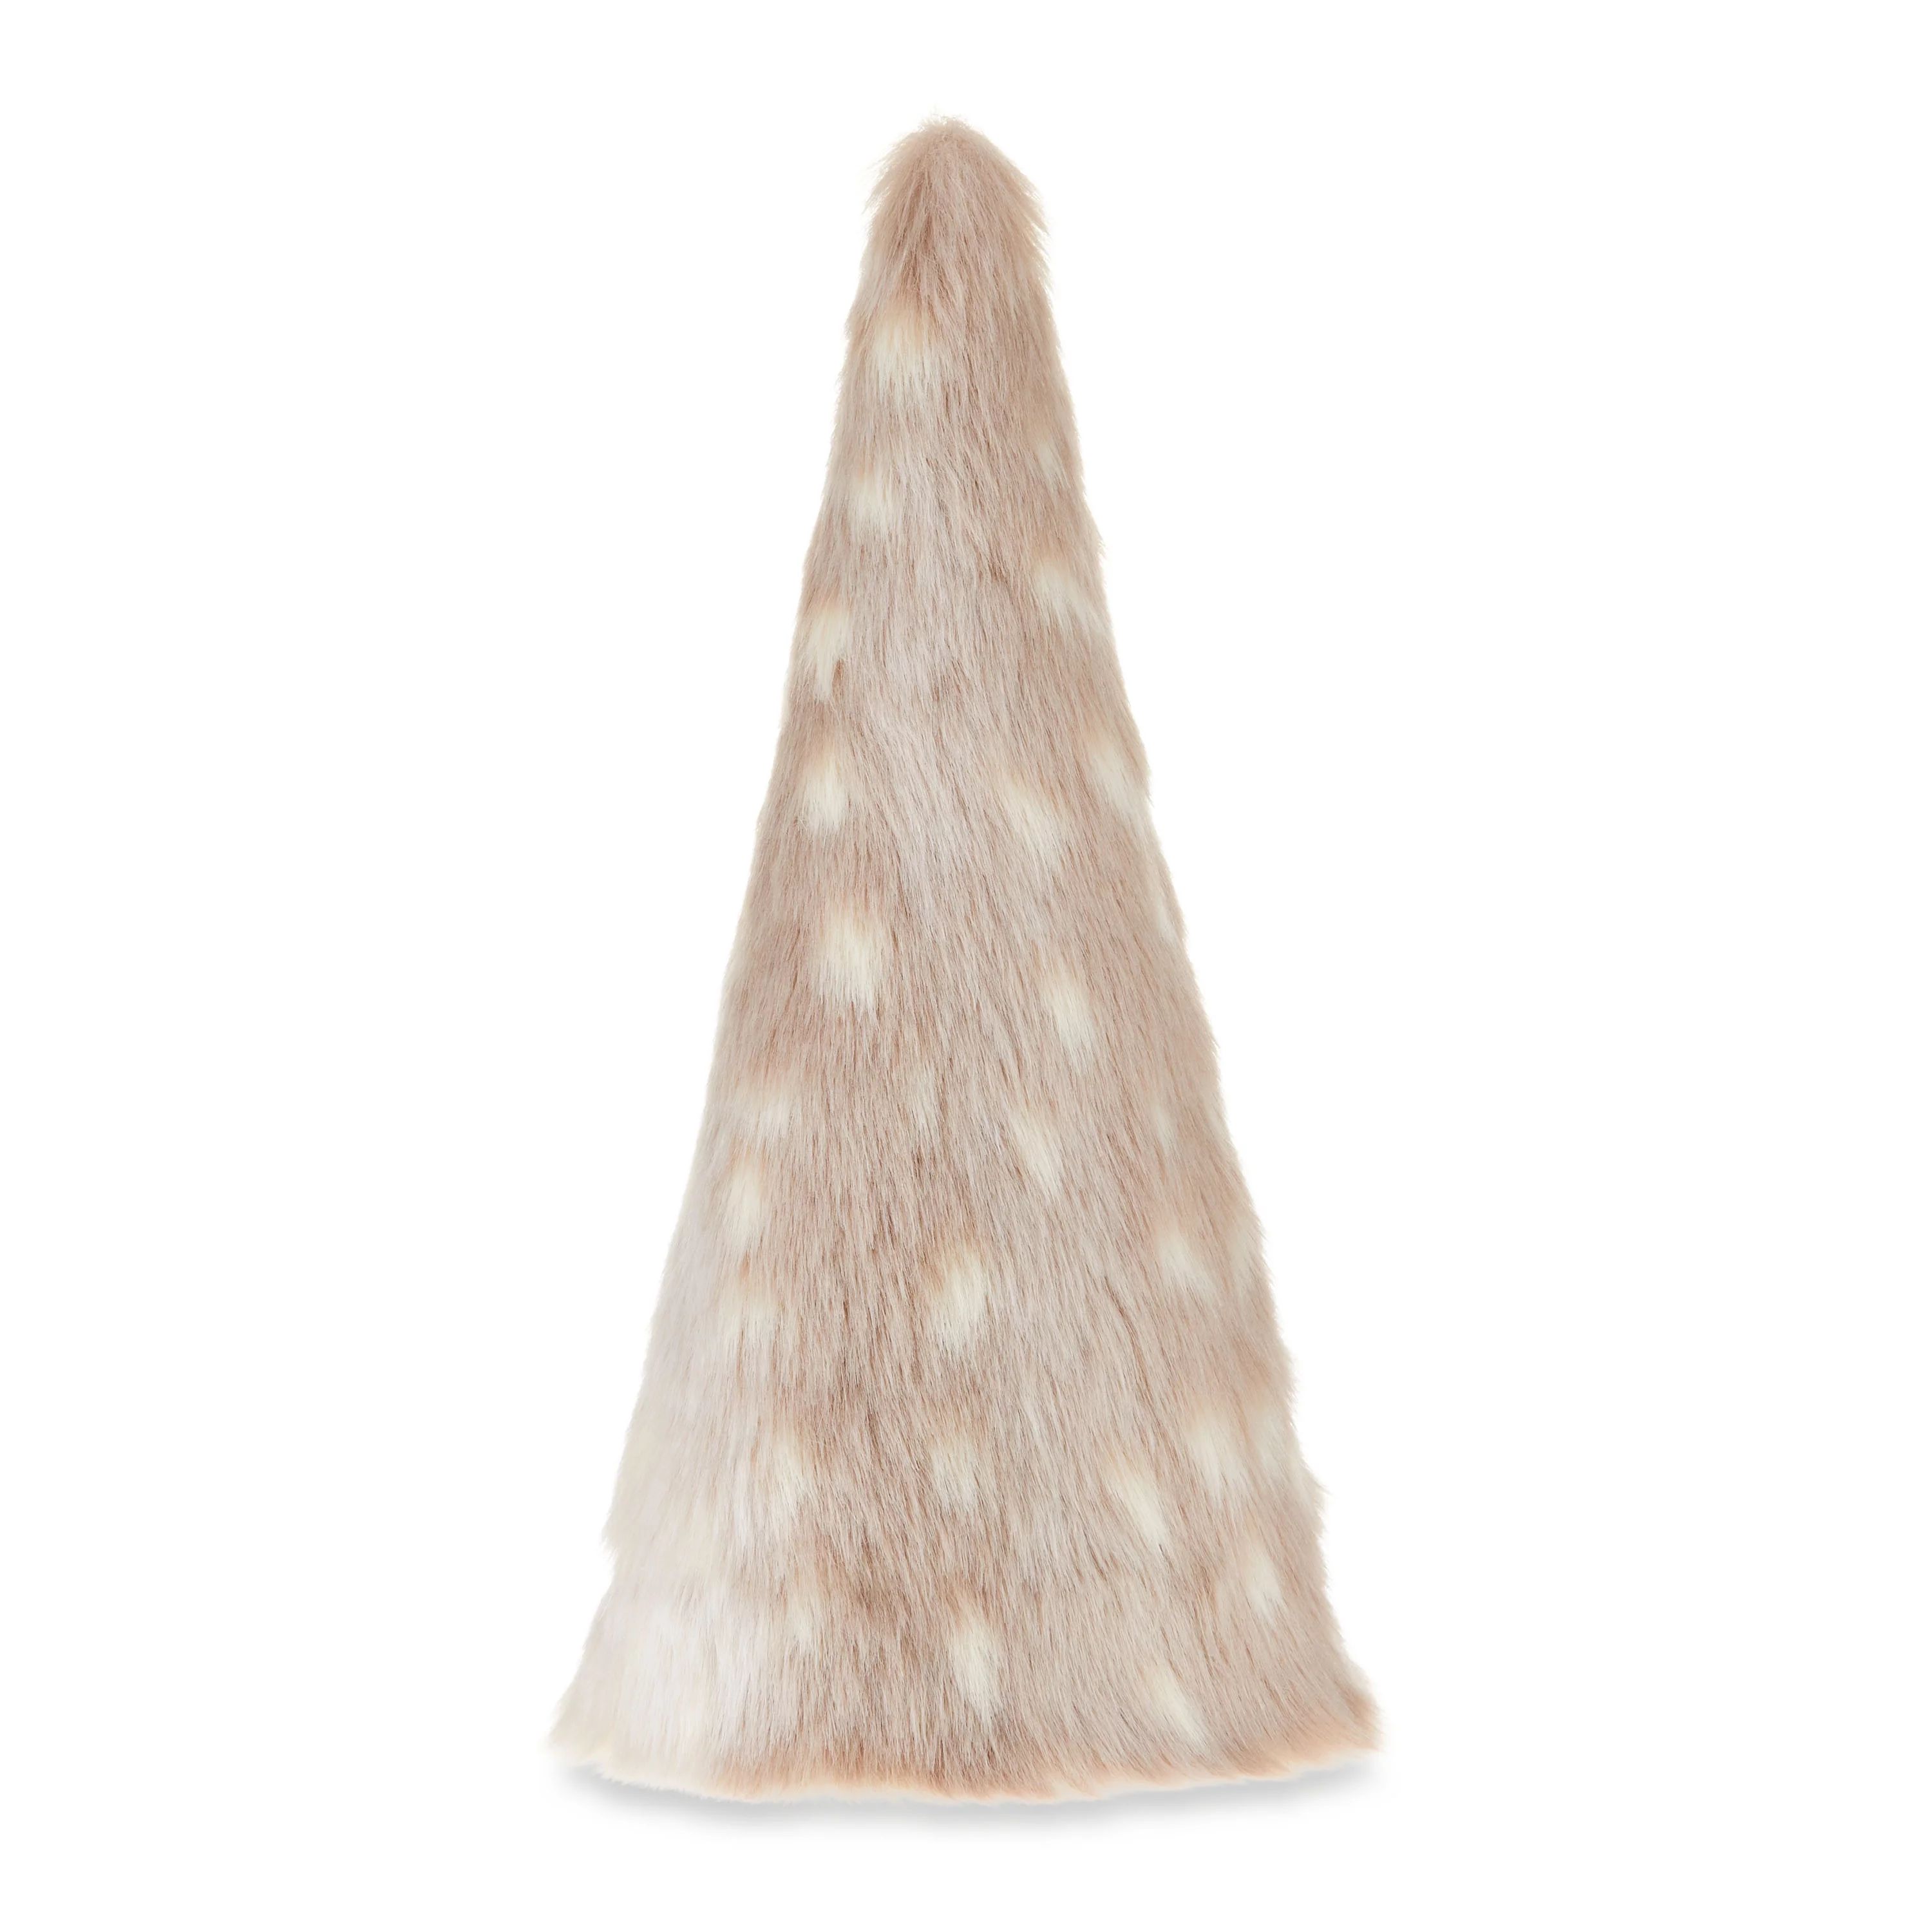 Small Light Brown Fabric Cone Tree Christmas Decoration, 12", by Holiday Time | Walmart (US)